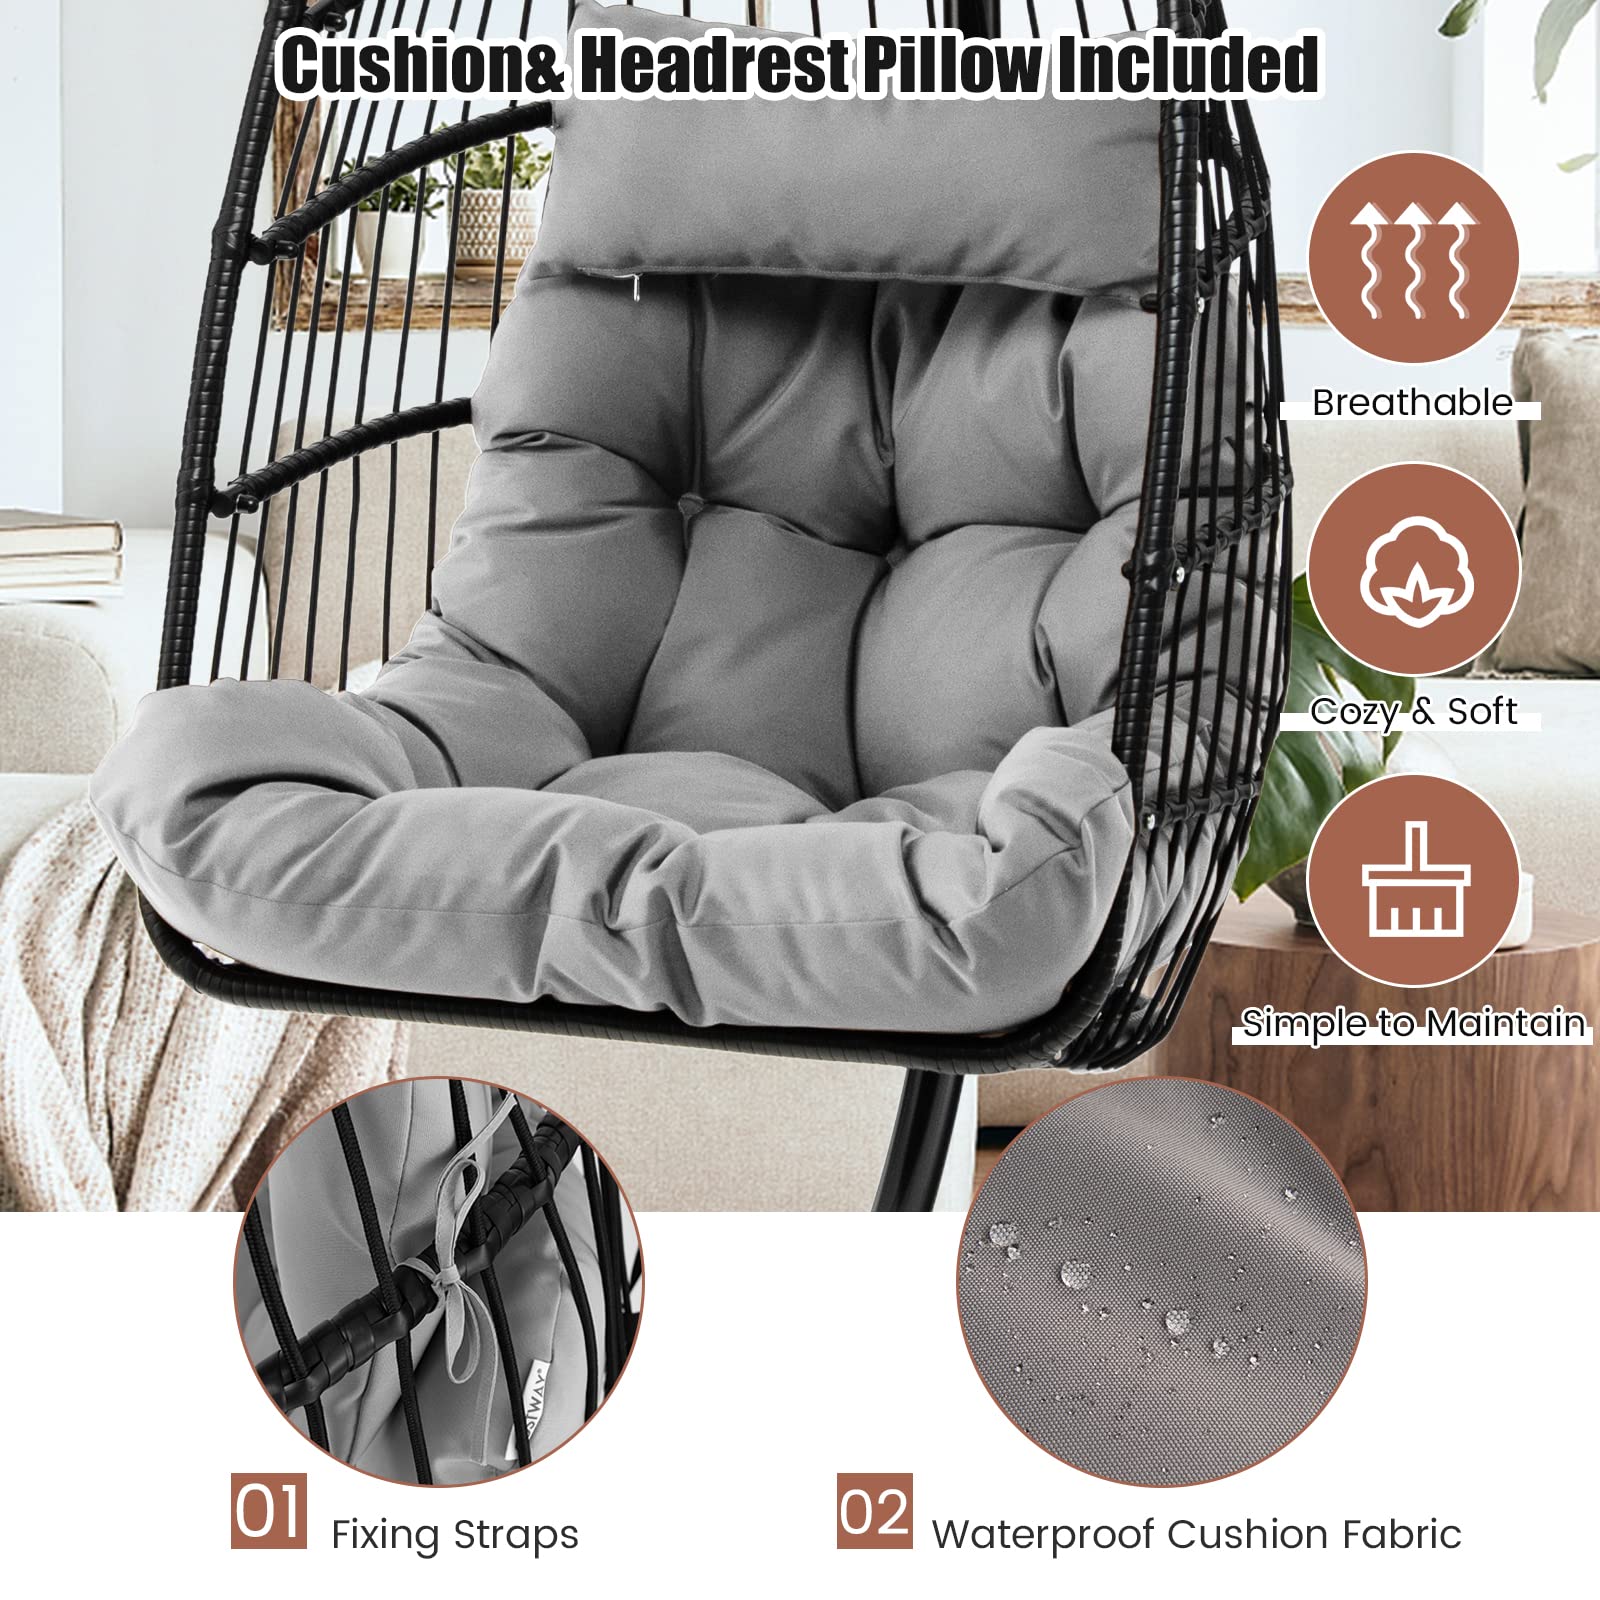 Giantex Egg Chair with Stand, Hanging Basket Chair Hammock Chair w/ Steel Stand Pillow Seat Cushion Rattan Basket & Dust Cover